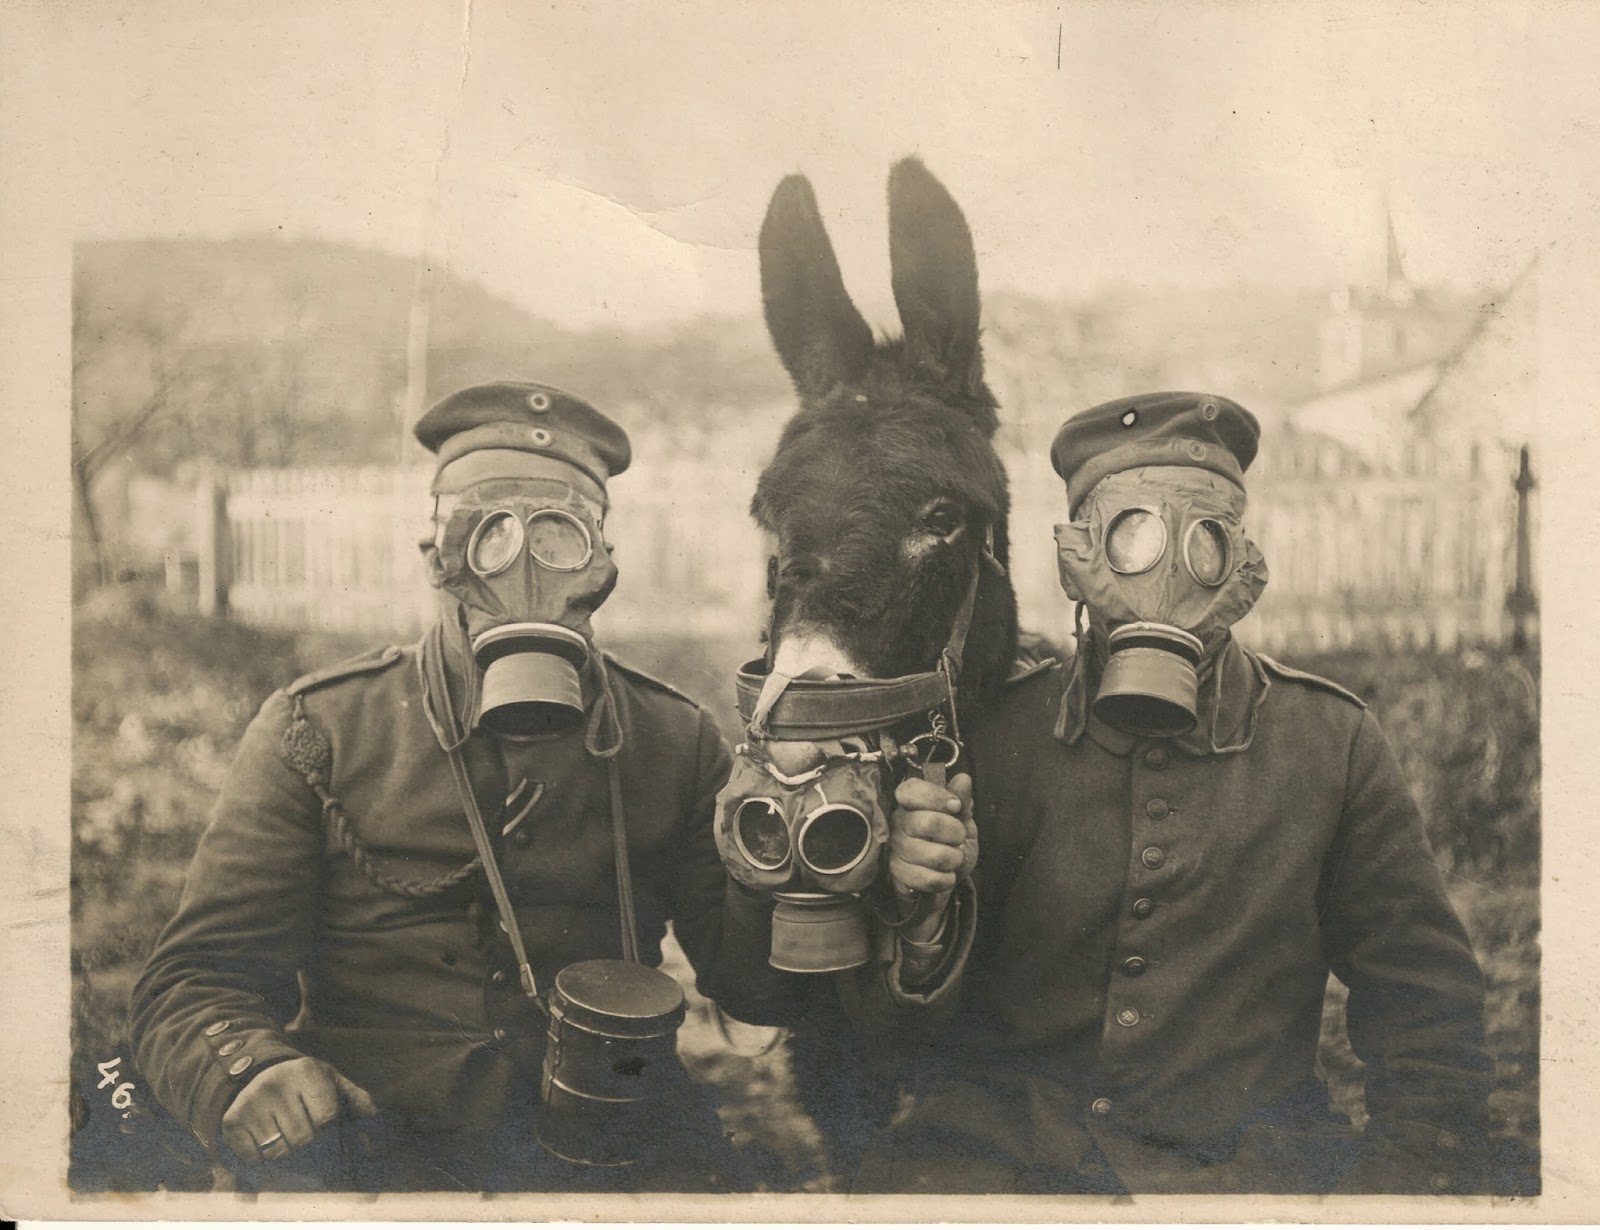 Two German soldiers and their mule wearing gas masks in WWI, 1916.